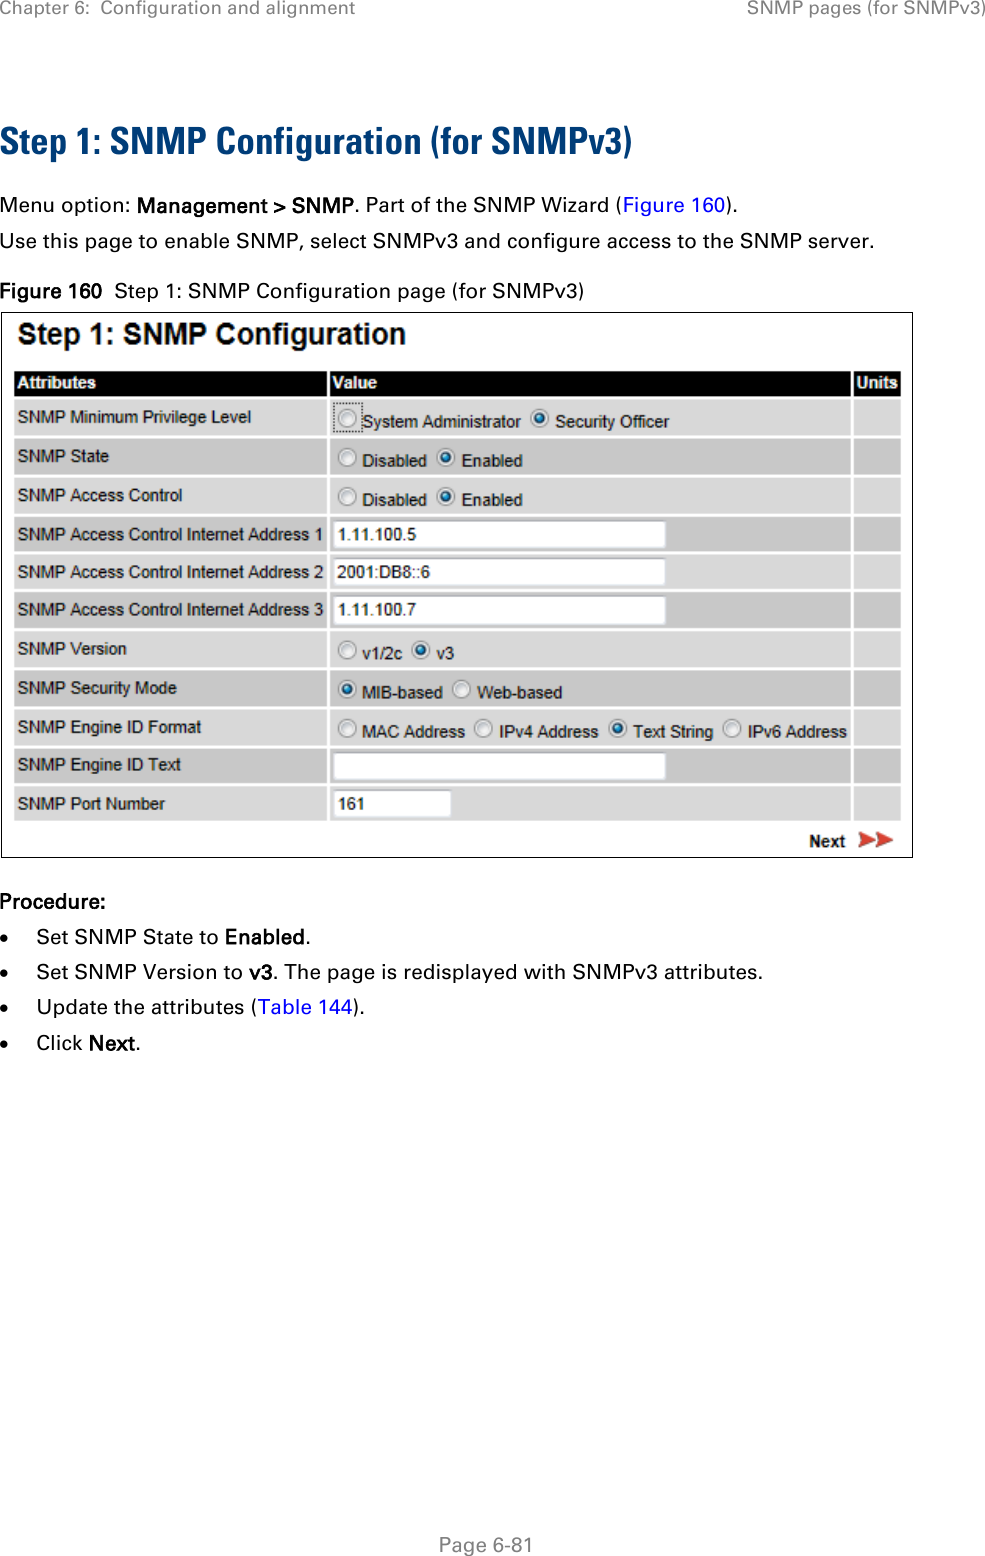 Chapter 6:  Configuration and alignment SNMP pages (for SNMPv3)  Step 1: SNMP Configuration (for SNMPv3) Menu option: Management &gt; SNMP. Part of the SNMP Wizard (Figure 160). Use this page to enable SNMP, select SNMPv3 and configure access to the SNMP server.  Figure 160  Step 1: SNMP Configuration page (for SNMPv3)  Procedure: • Set SNMP State to Enabled. • Set SNMP Version to v3. The page is redisplayed with SNMPv3 attributes. • Update the attributes (Table 144). • Click Next.      Page 6-81 